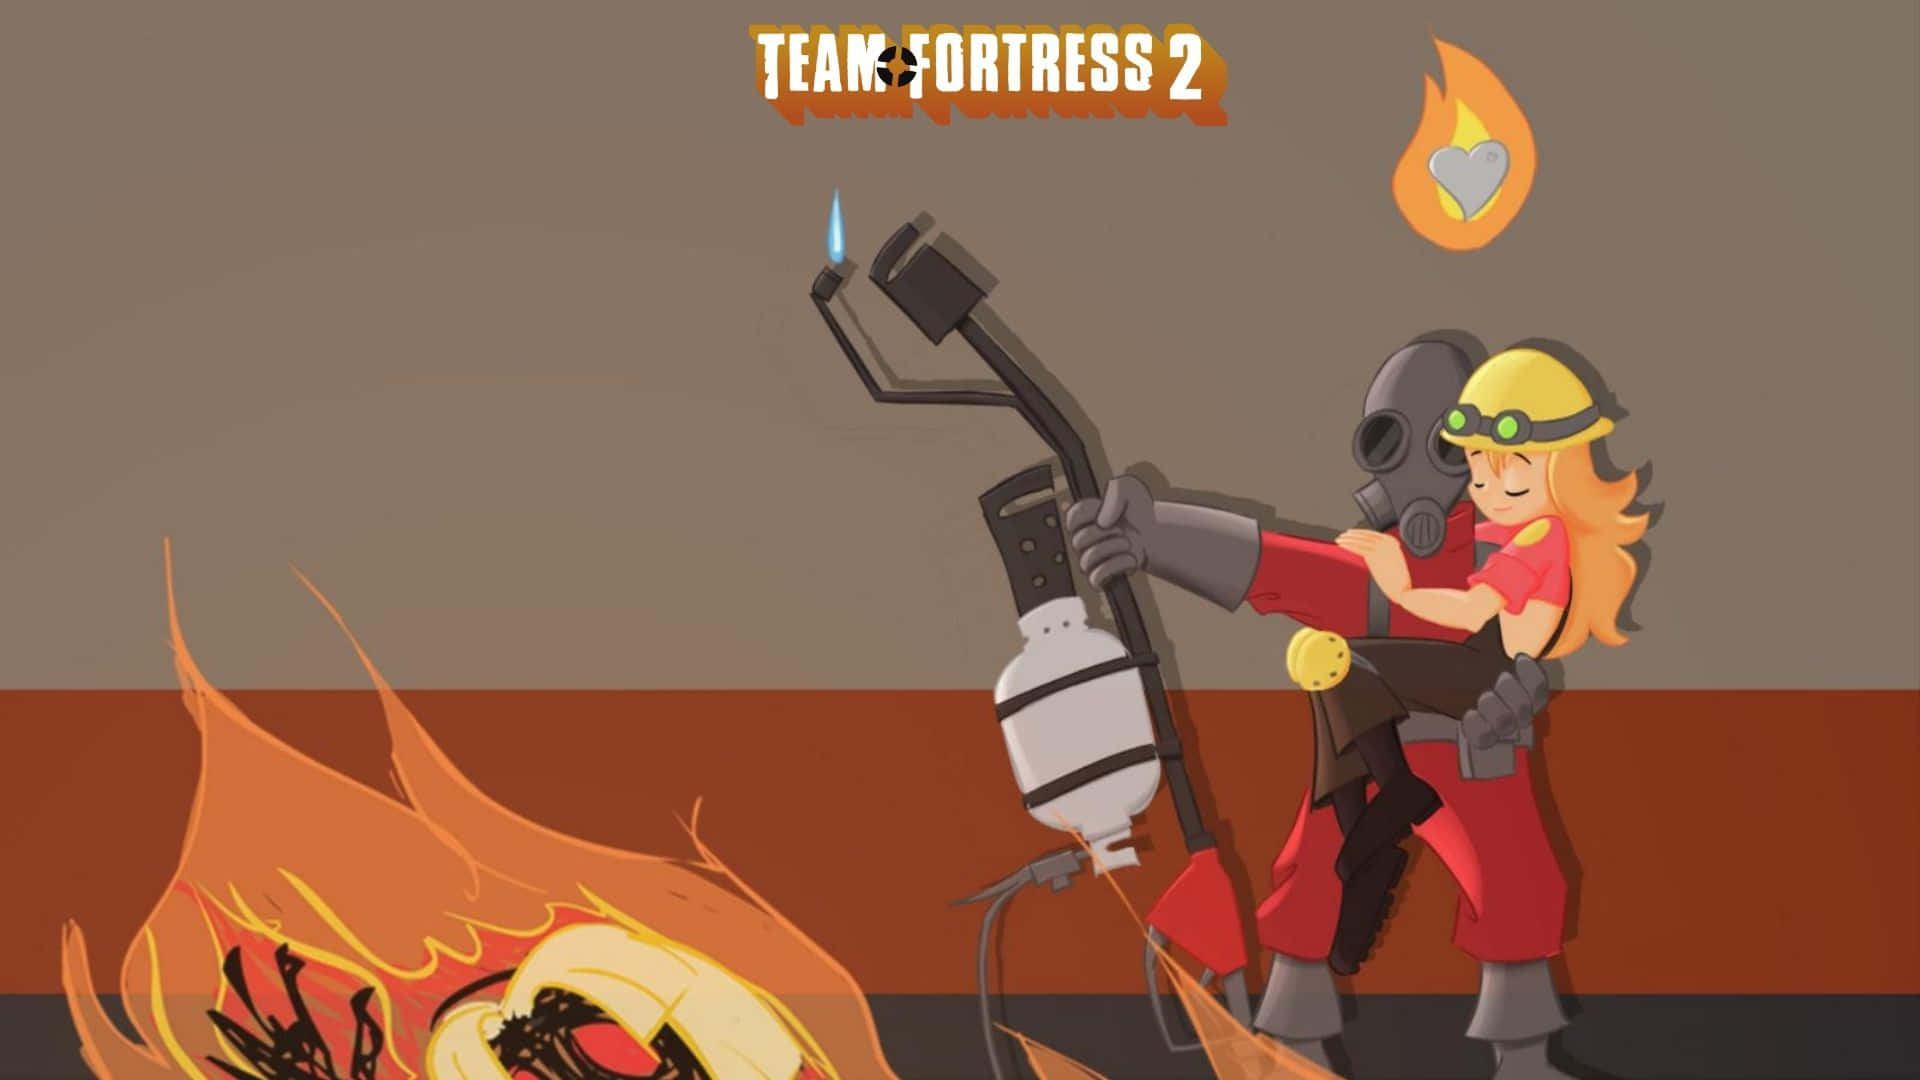 Experience the thrill of Team Fortress 2 in full HD on your desktop